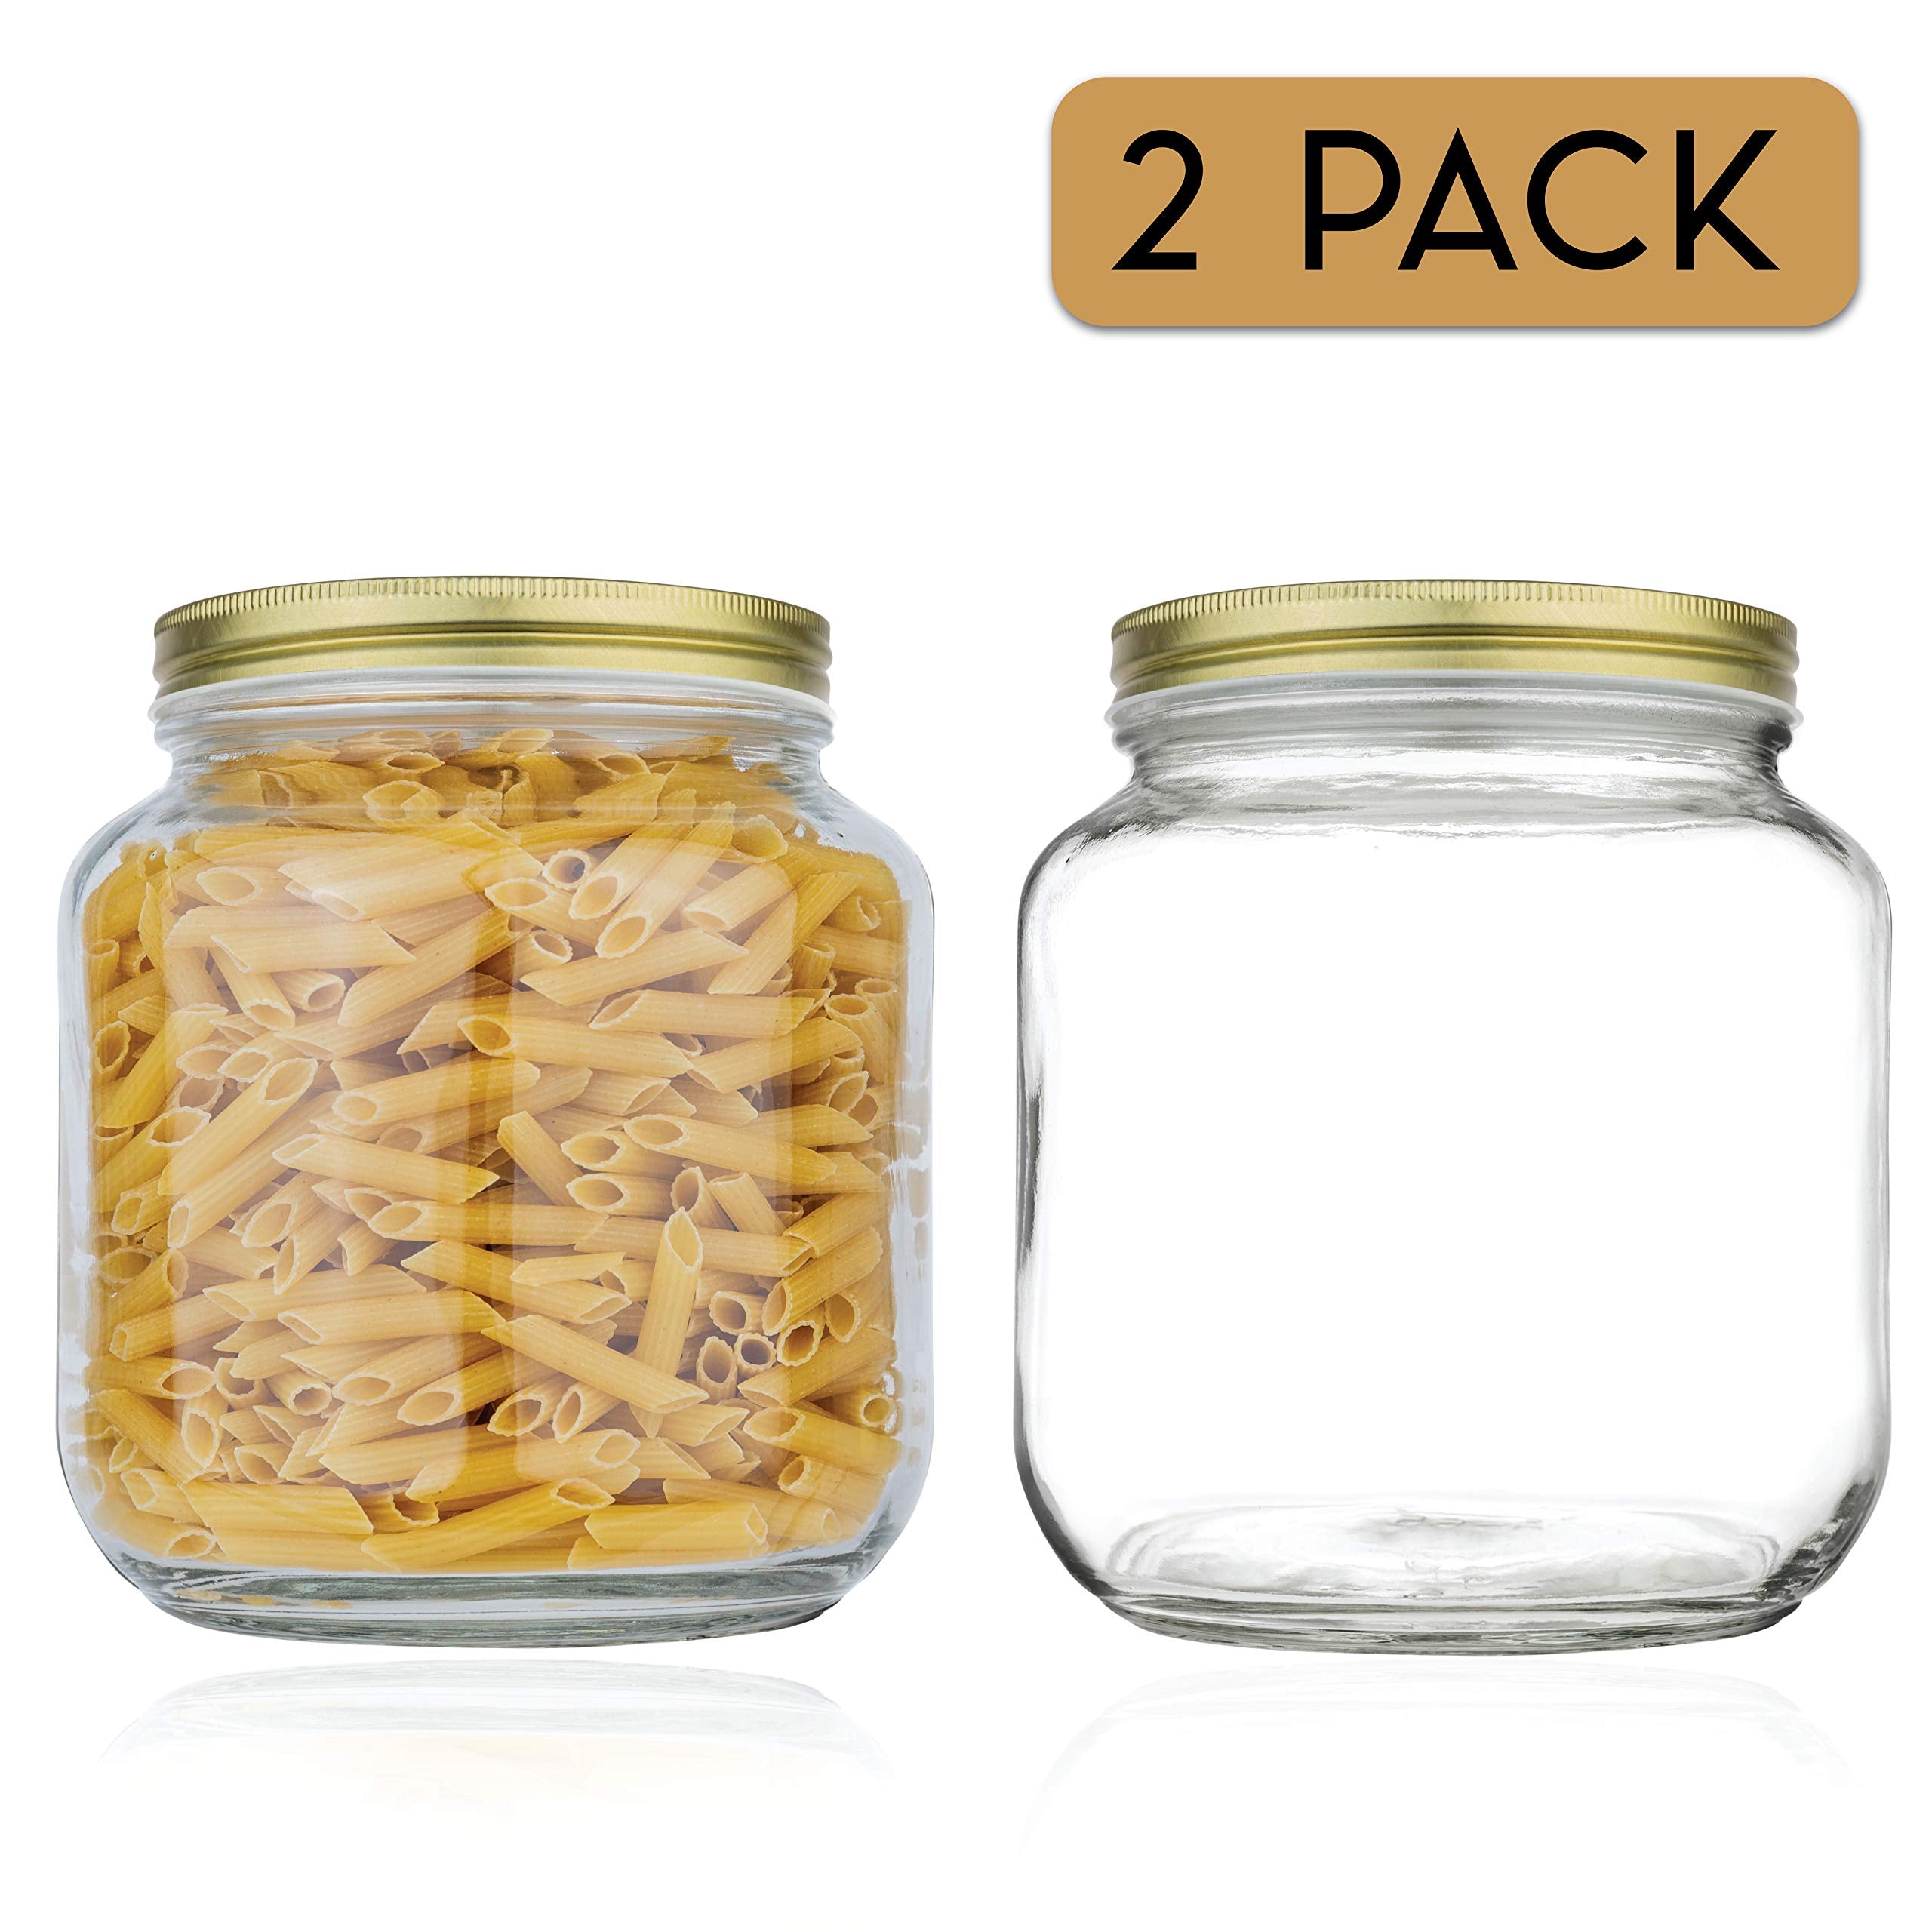 kitchentoolz Half Gallon Mason Jar Wide Mouth with Airtight Metal Lid - Safe for Fermenting Kombucha Kefir - Curing Pickling, Storing and Canning - BPA-Free Dishwasher Safe  - Like New